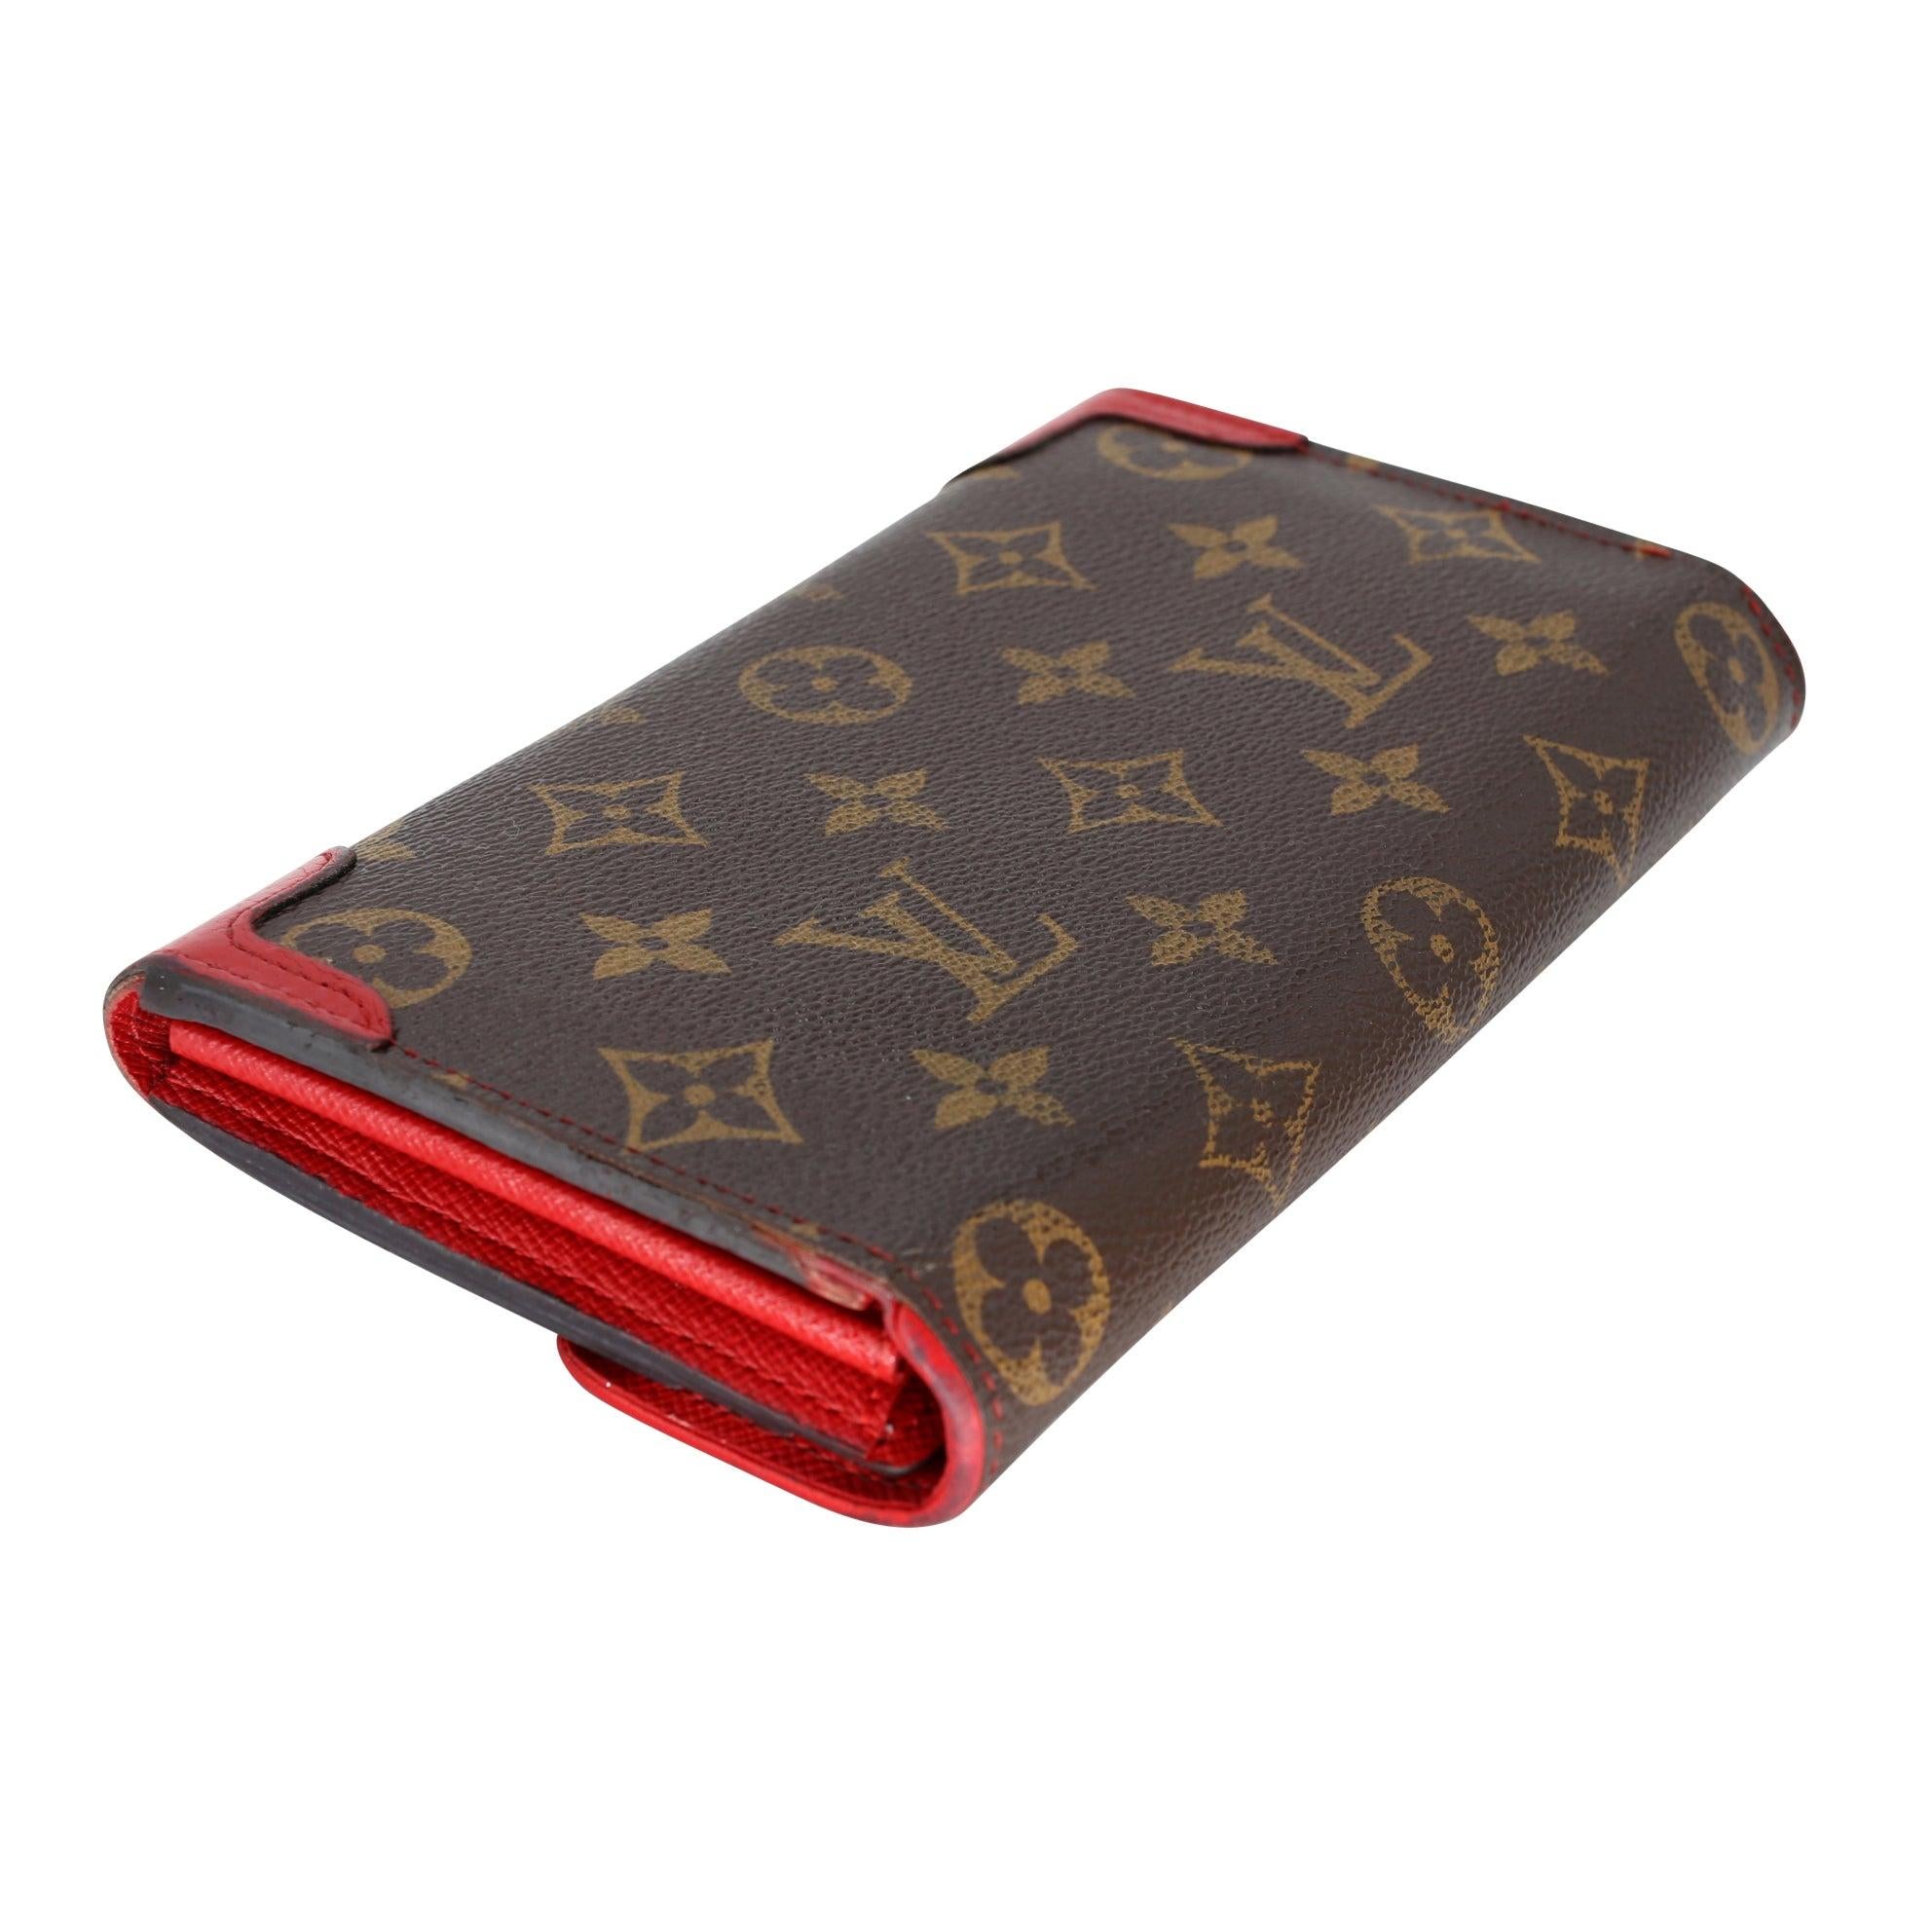 Louis Vuitton Portefeiulle Retiro French Push-lock Wallet LV-W1020P-A001 In Good Condition For Sale In Downey, CA